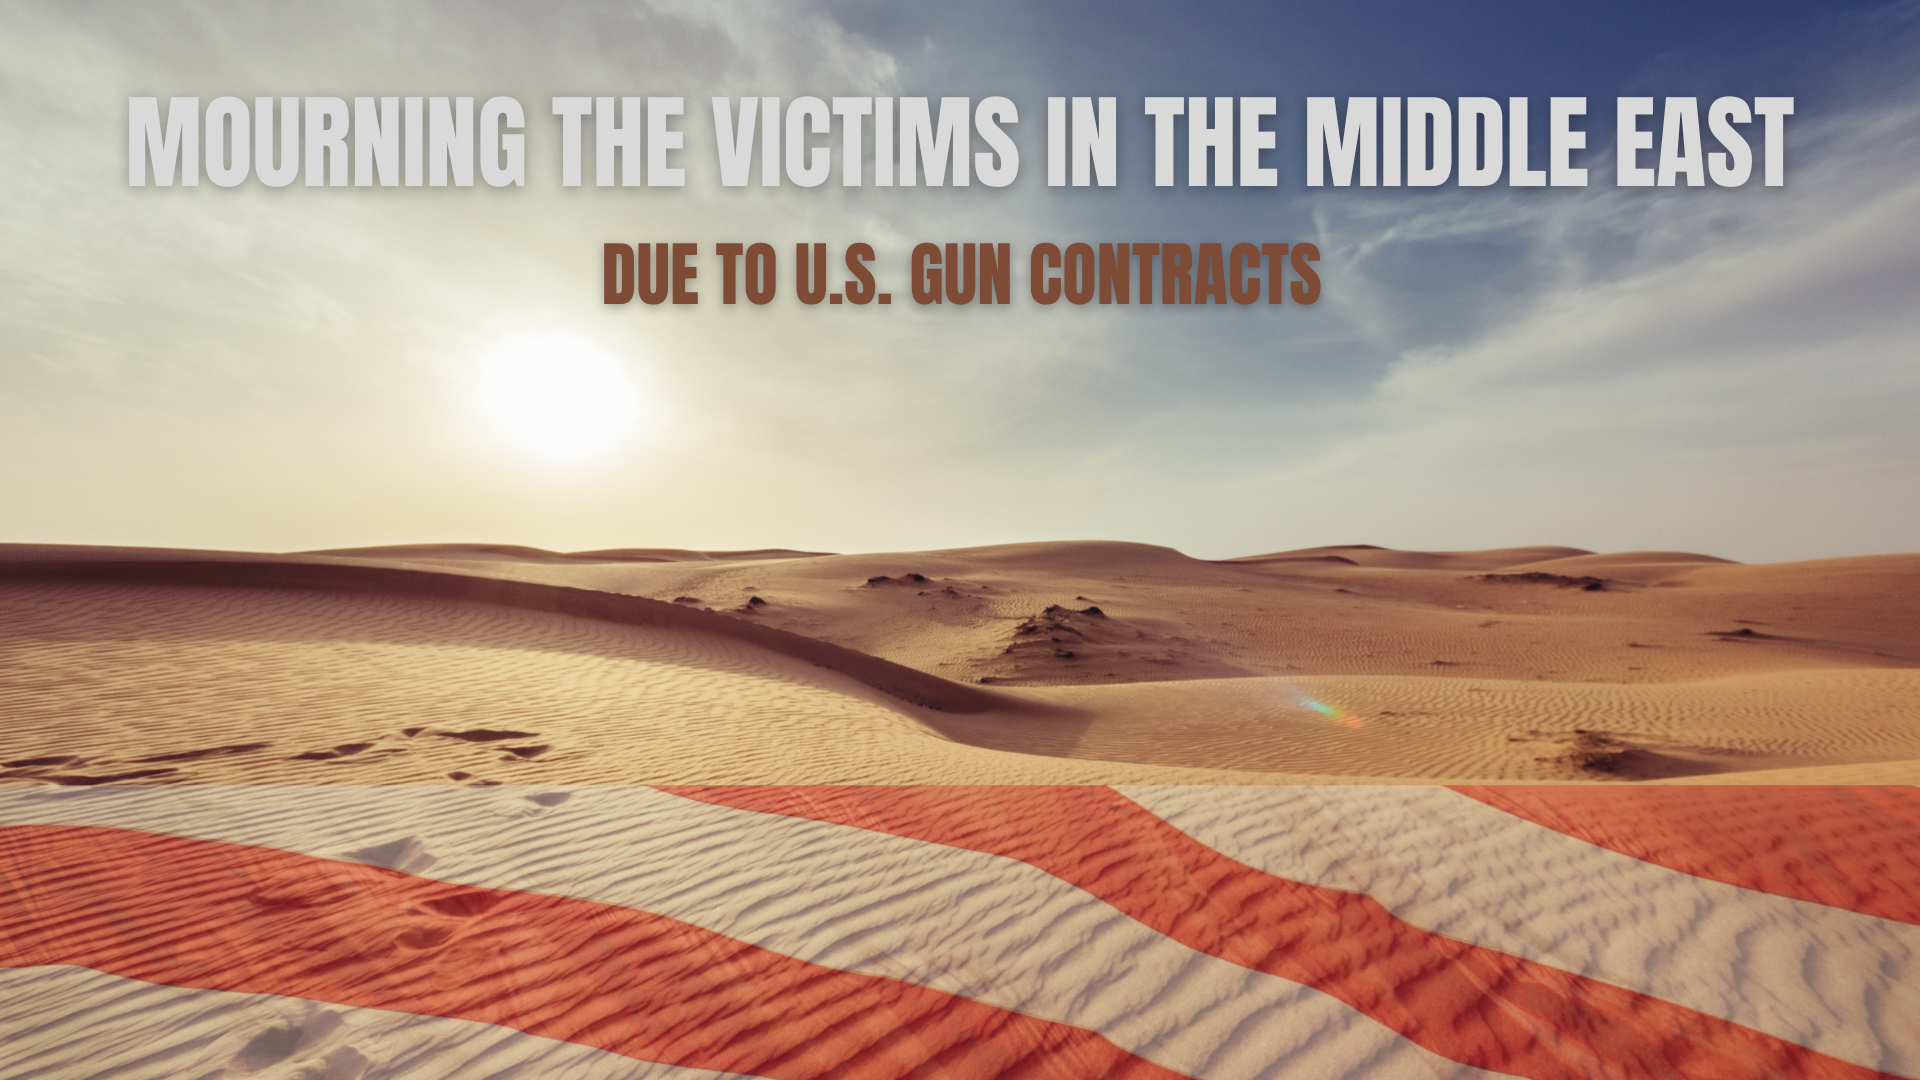 In a State of Mourning: US Gun Contracts, the Middle East and the Victims Affected